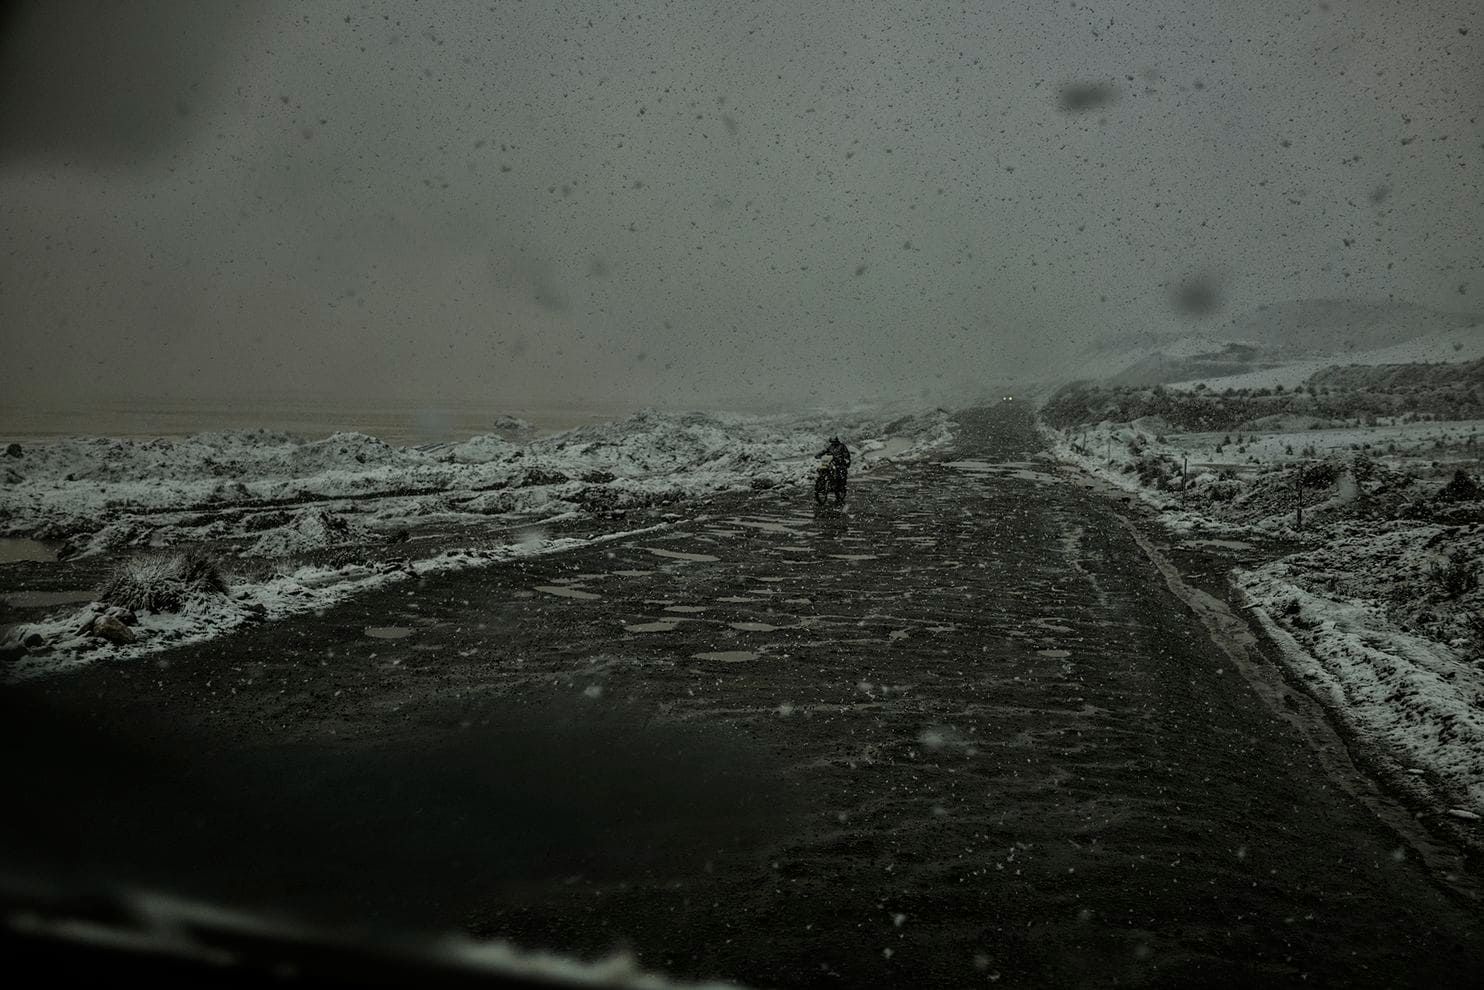 A miner on a motorcycle battles a springtime snow squall on his way back to the mine. It can snow 12 months out of the year, and miners work in harsh conditions 17,000 feet or higher. Peru, 2019. Image by James Whitlow Delano.